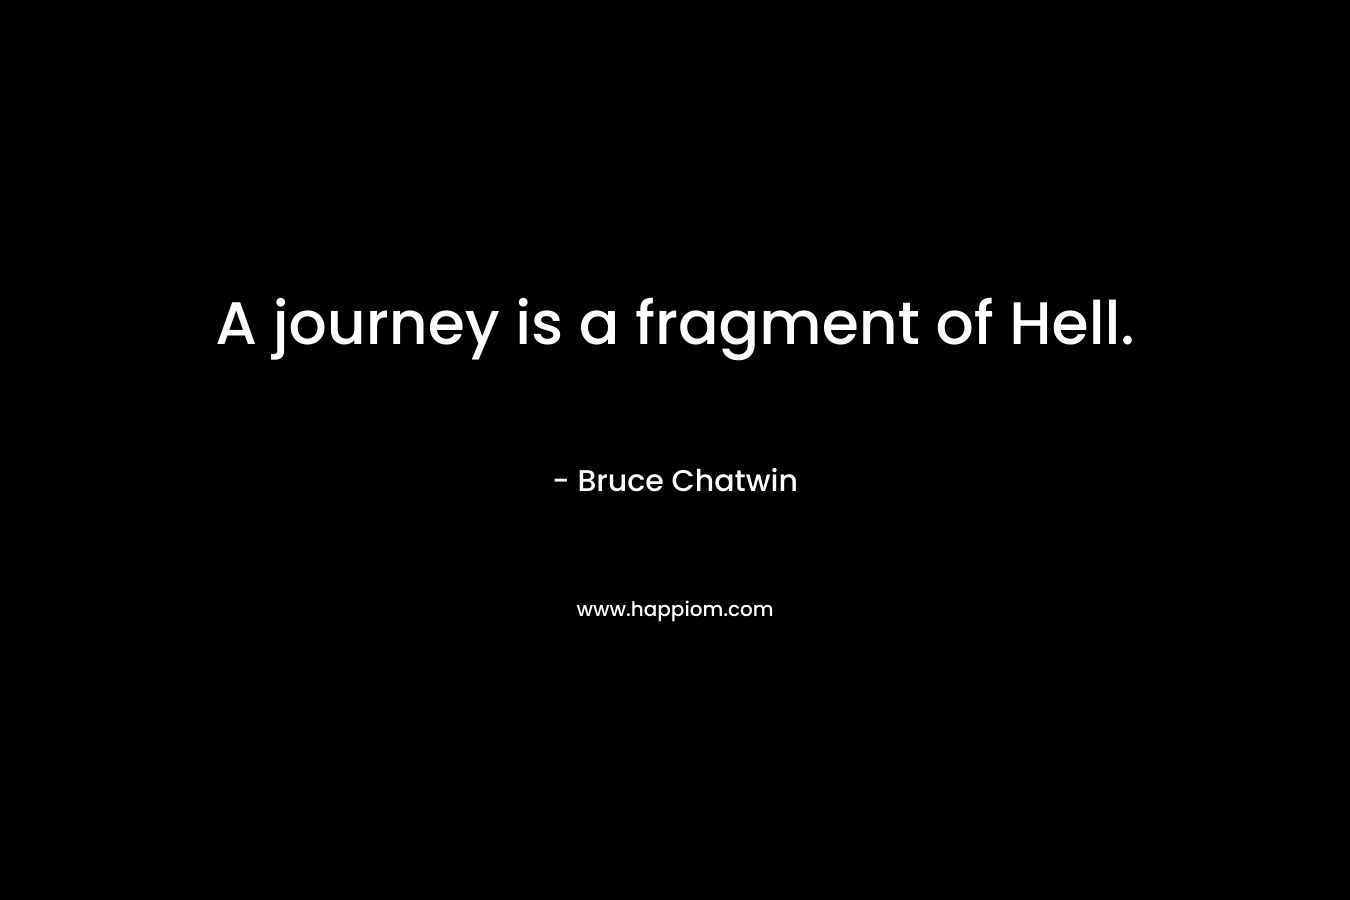 A journey is a fragment of Hell. – Bruce Chatwin